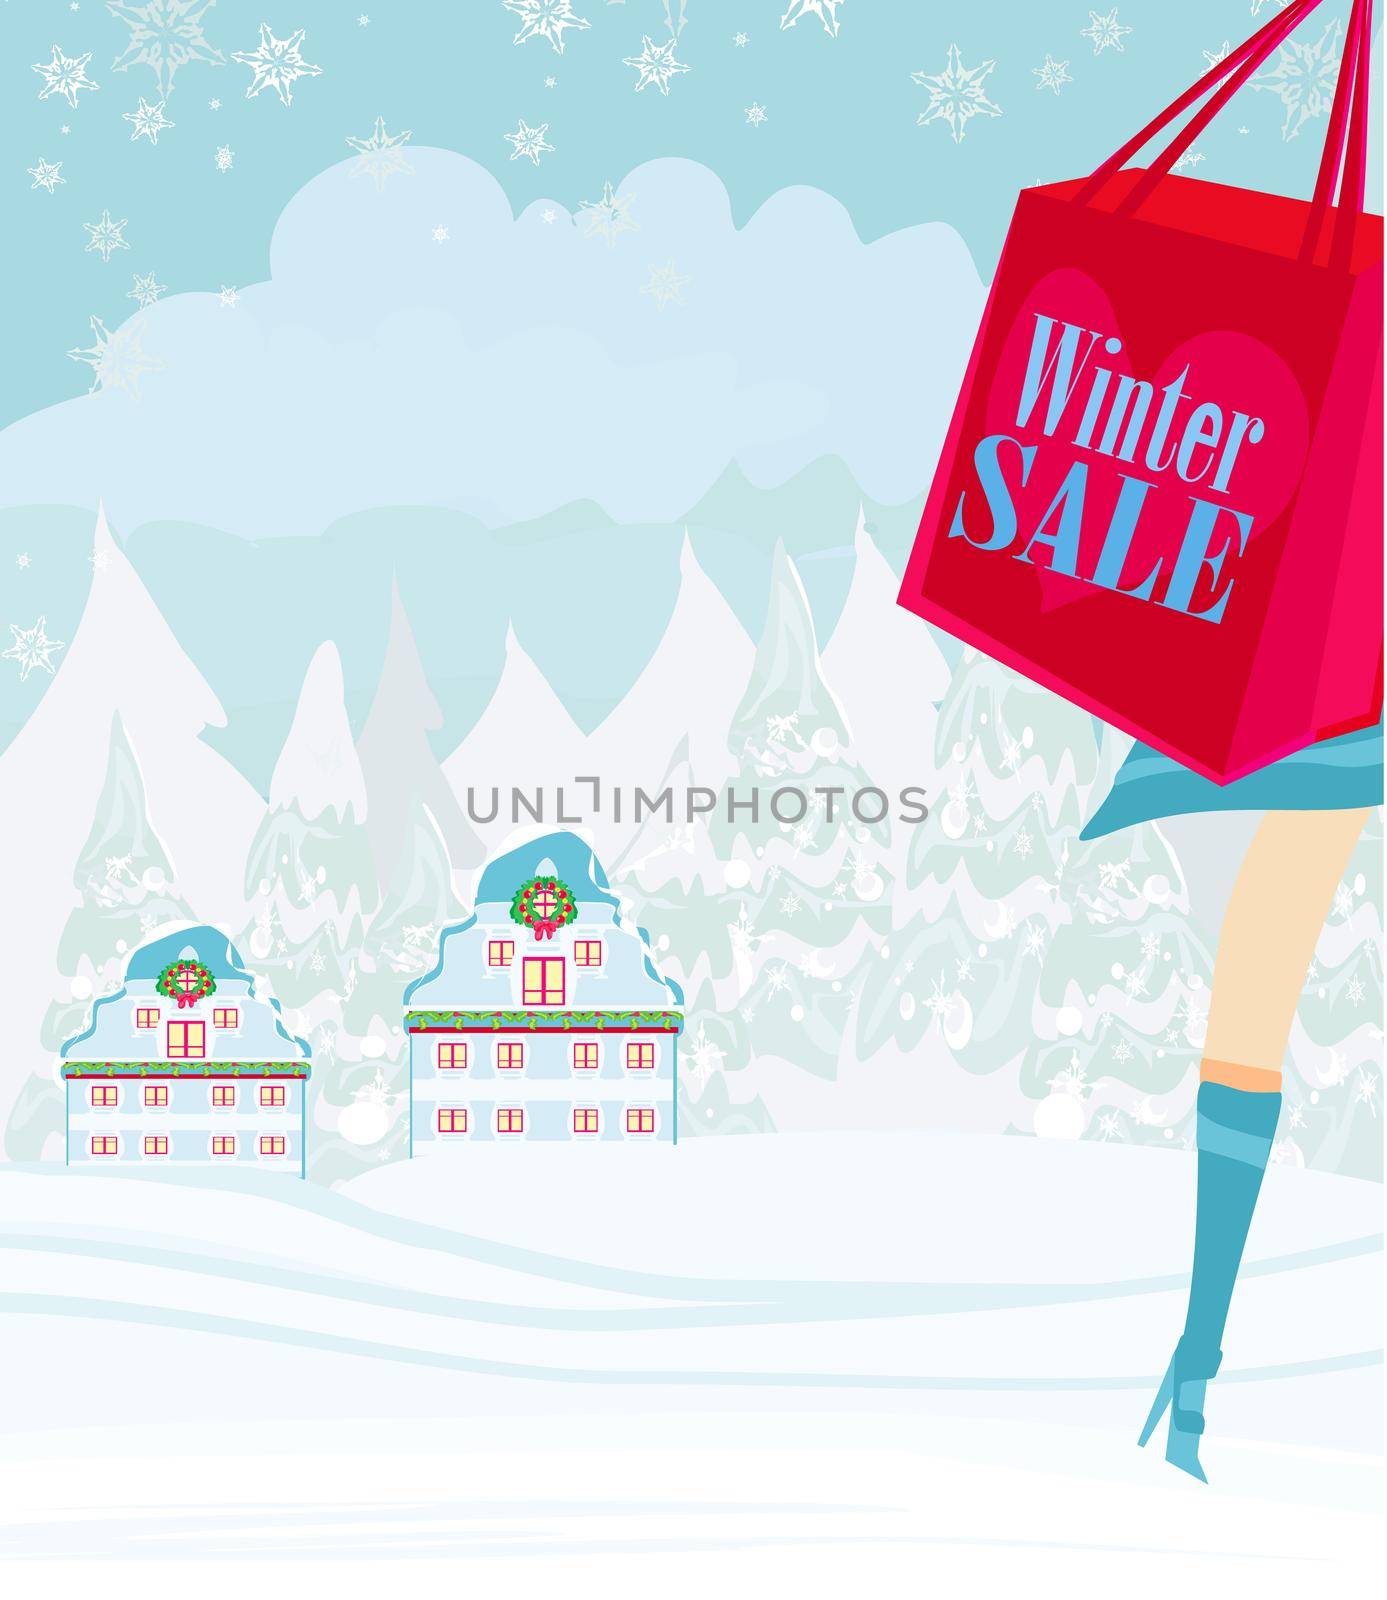 Christmas shopping - winter sale card